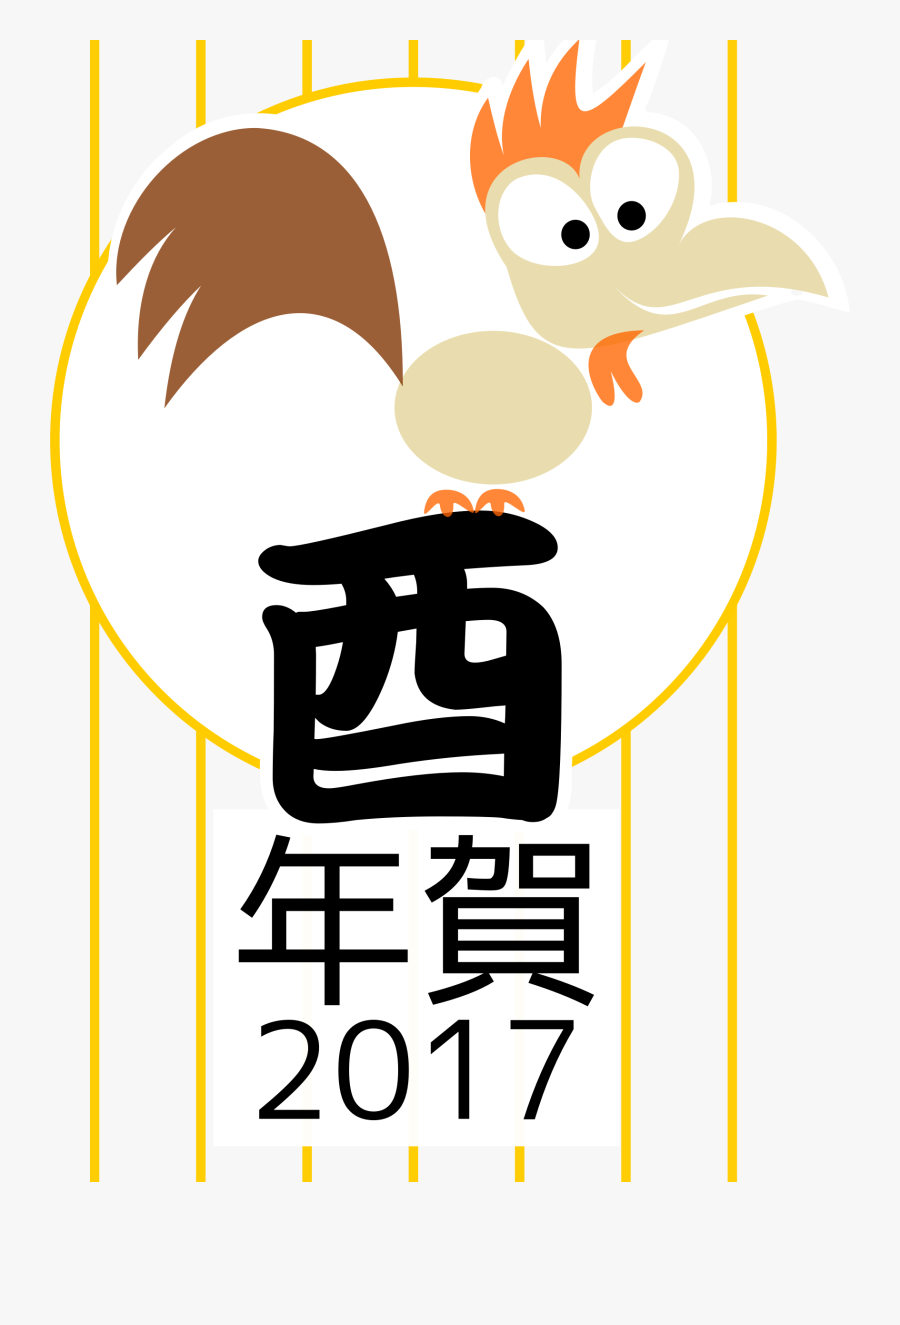 Clipart - Chinese Year 2017 Clipart, Transparent Clipart